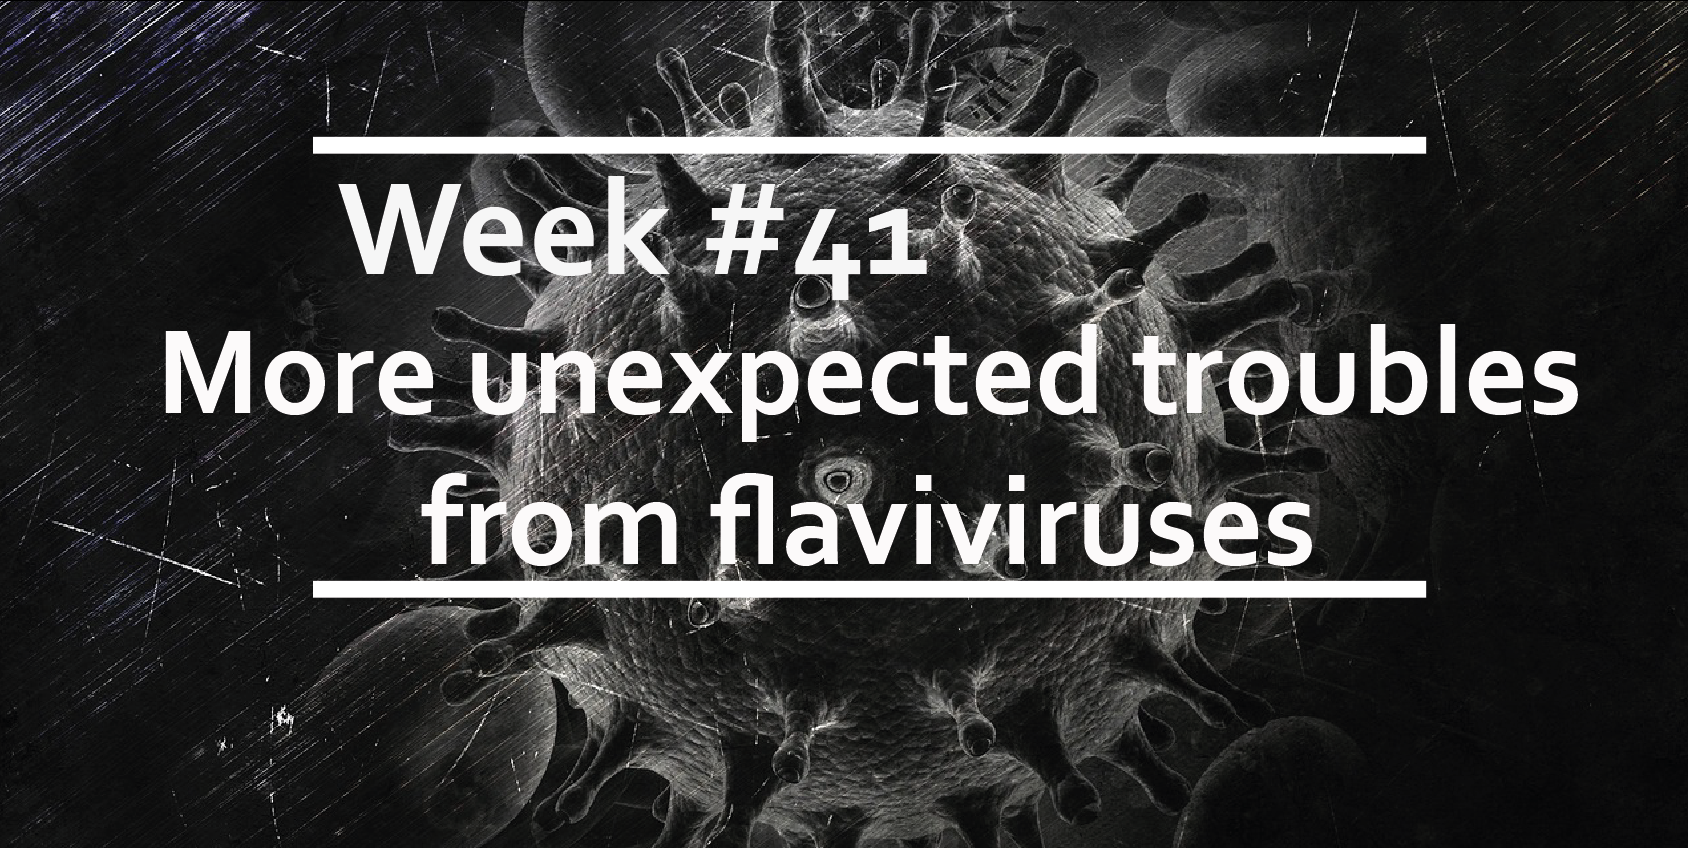 More unexpected troubles from flaviviruses